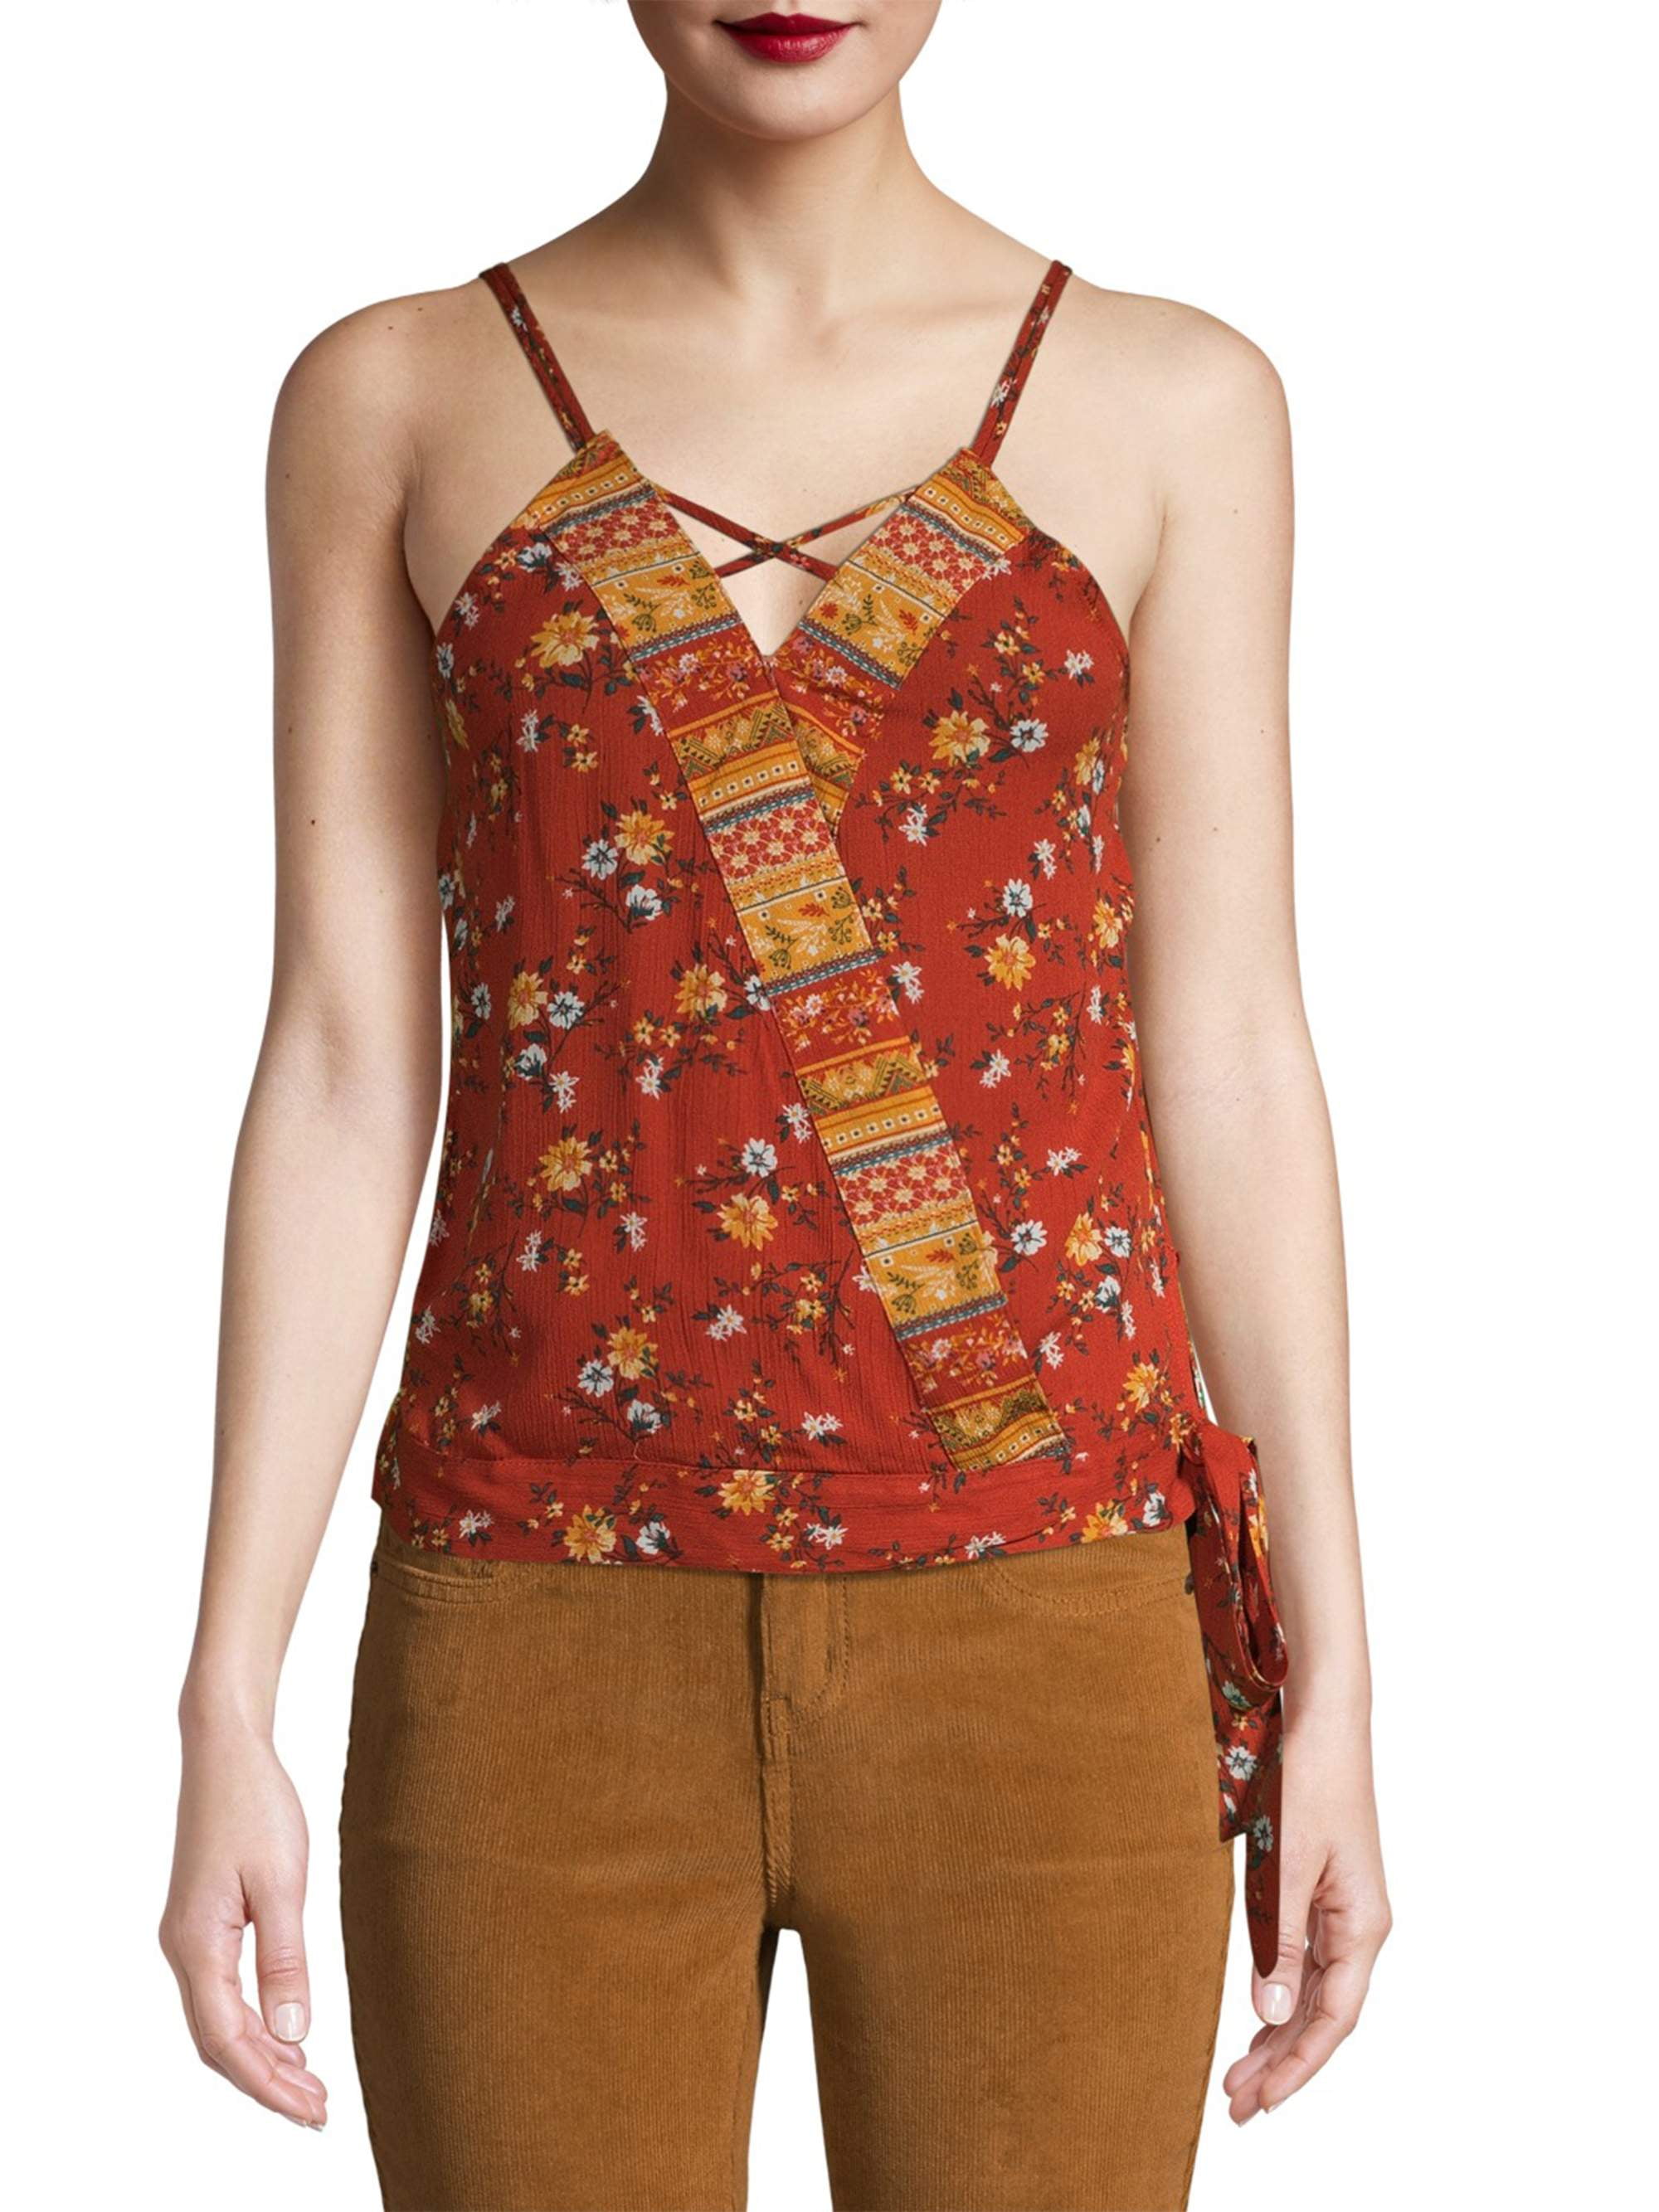 Details about   $34.00 Almost Famous Juniors' Sleeveless Utility Tunic Top 